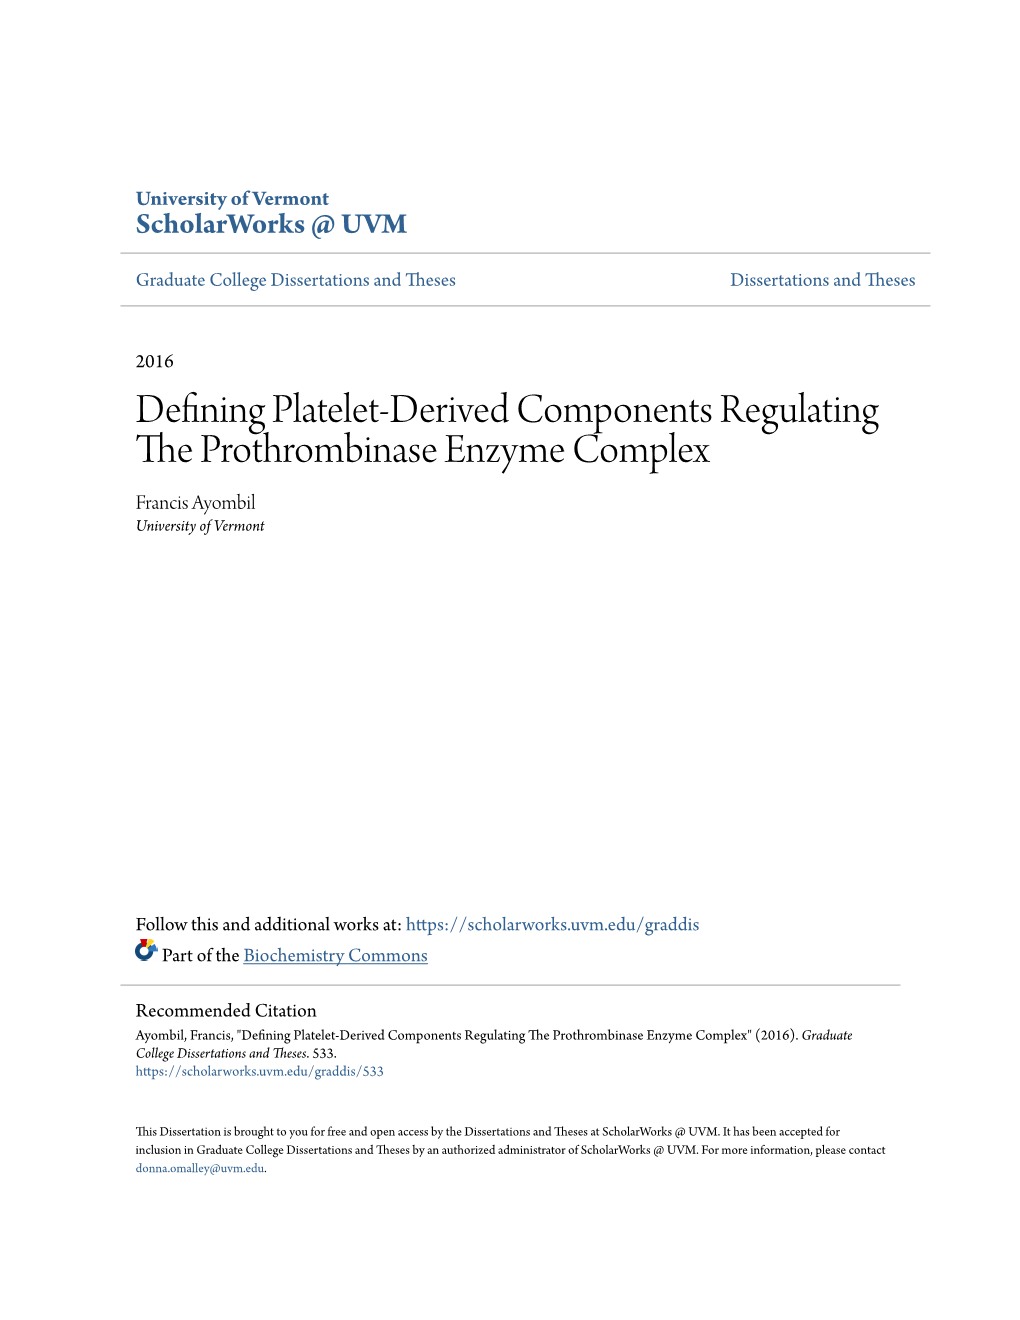 Defining Platelet-Derived Components Regulating the Rp Othrombinase Enzyme Complex Francis Ayombil University of Vermont